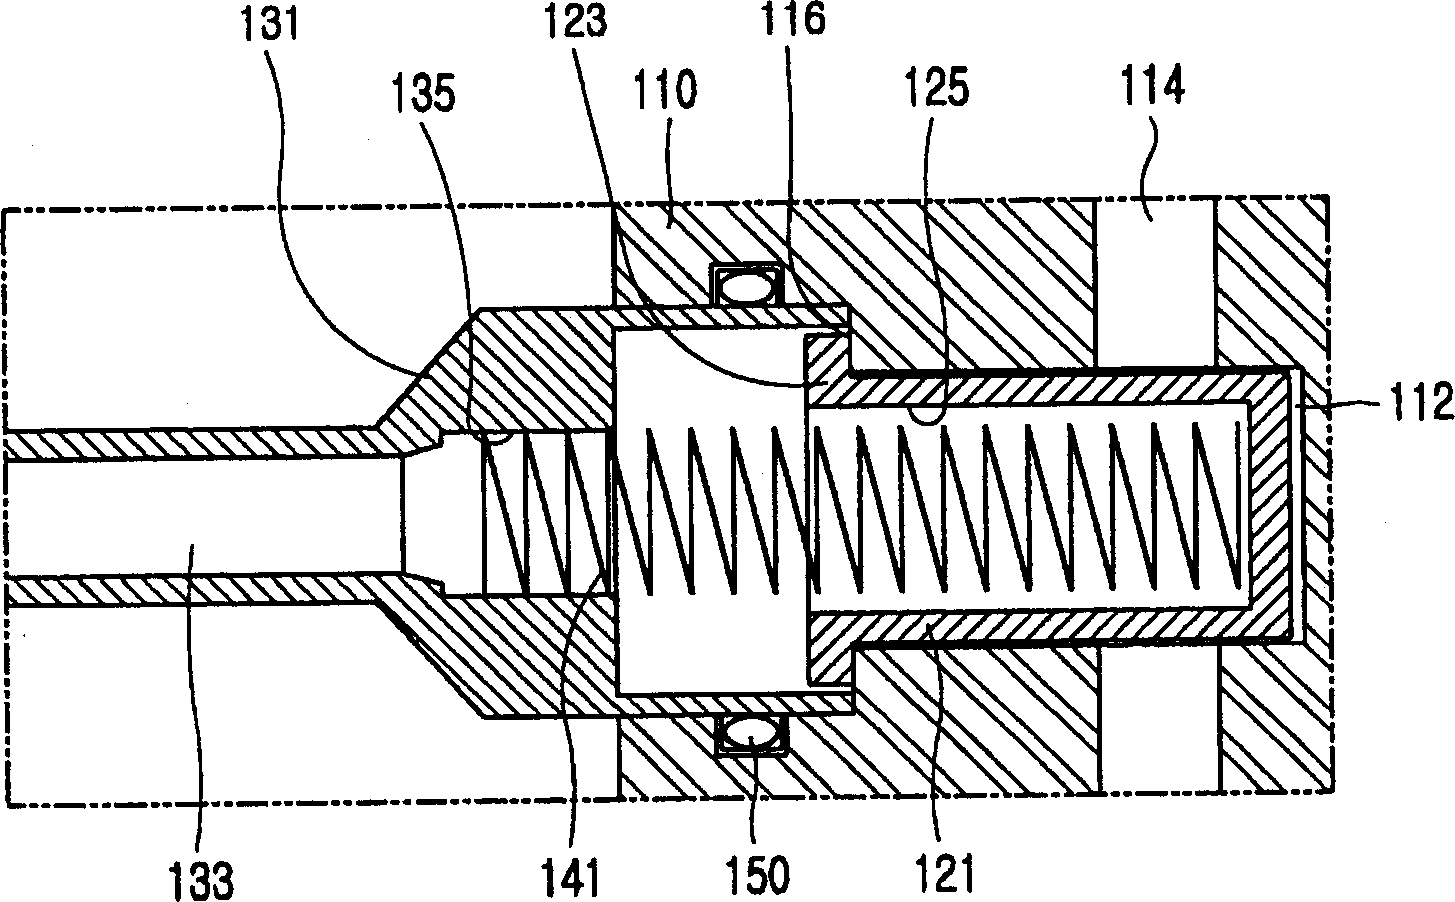 Apparatus for changing capacity of multi-stage rotary compressor